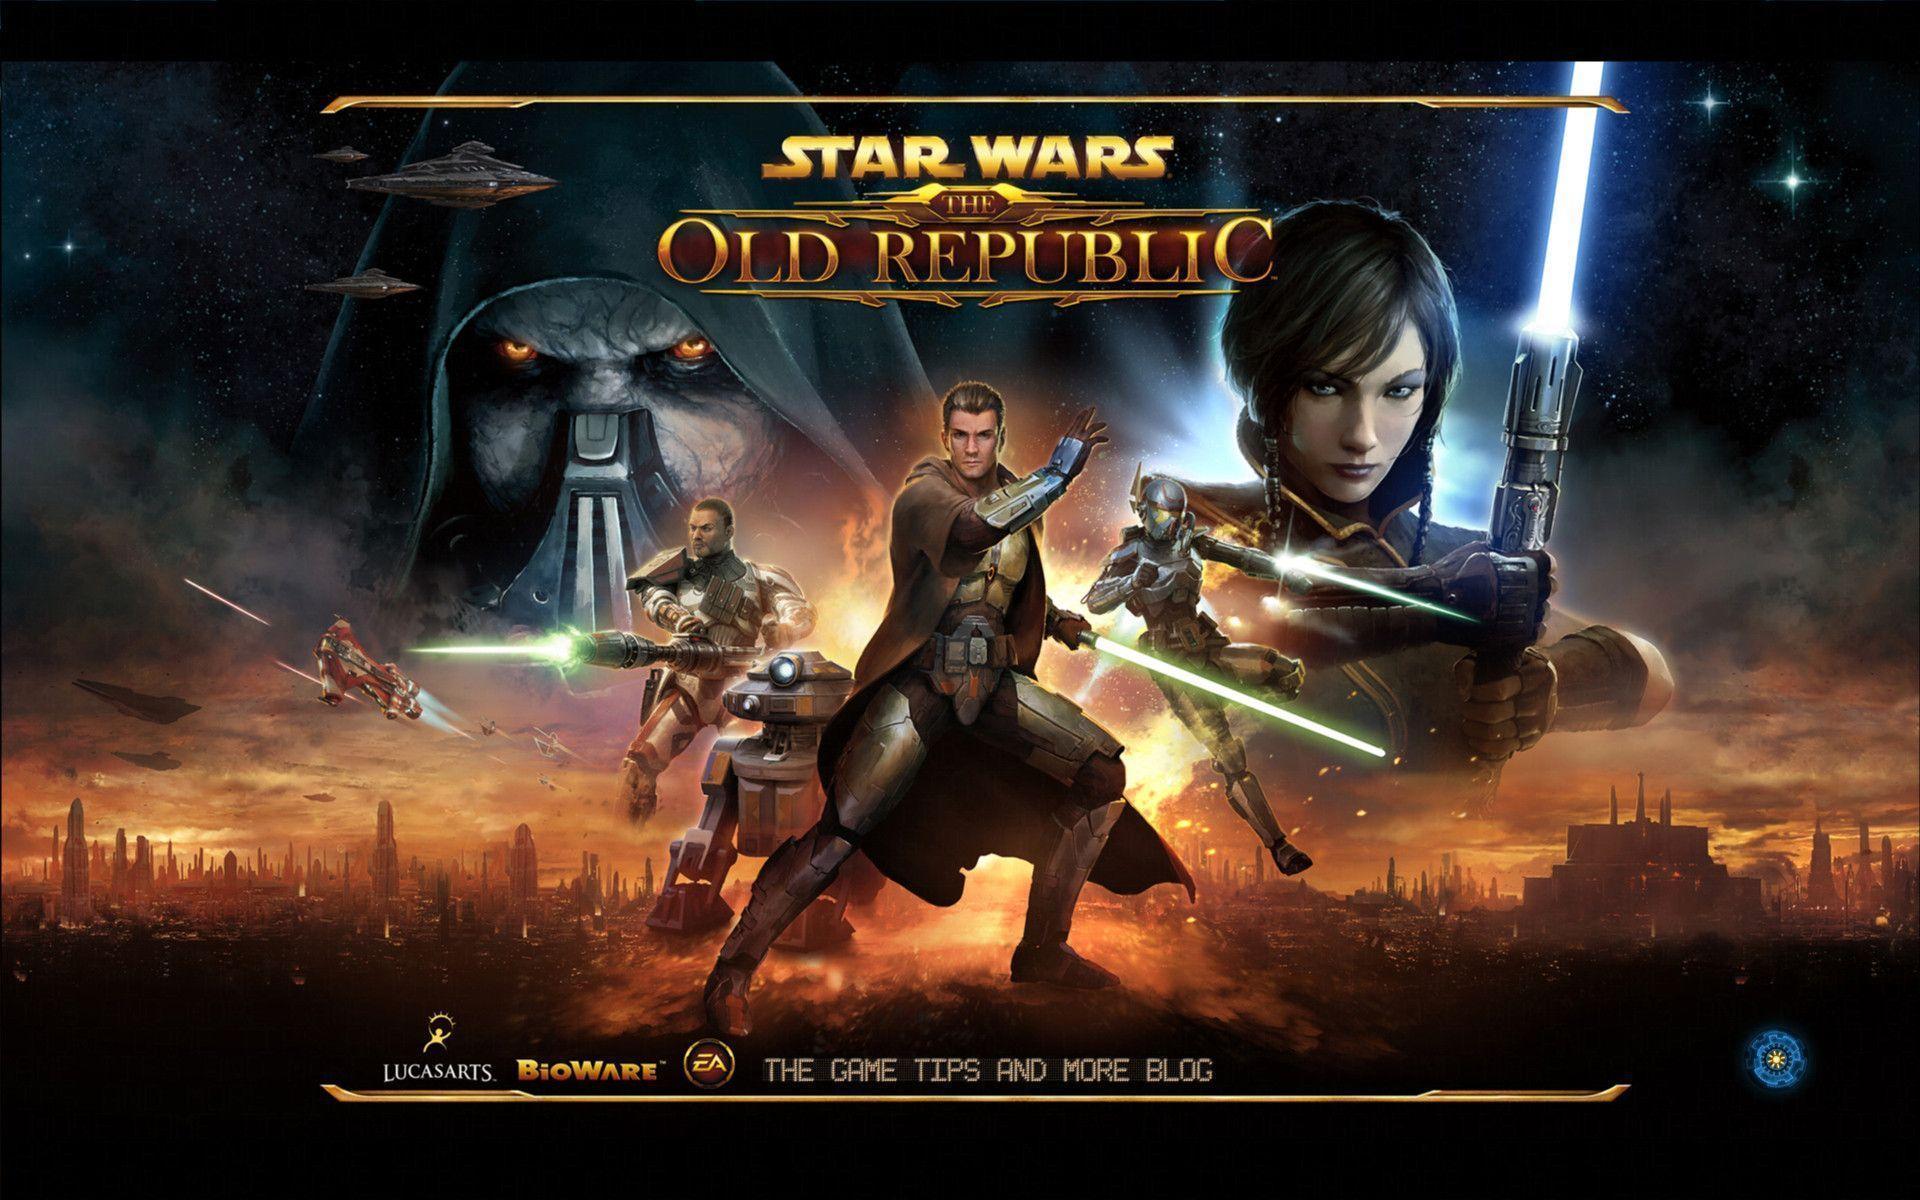 The Game Tips And More Blog: Star Wars: The Old Republic Gets Anti